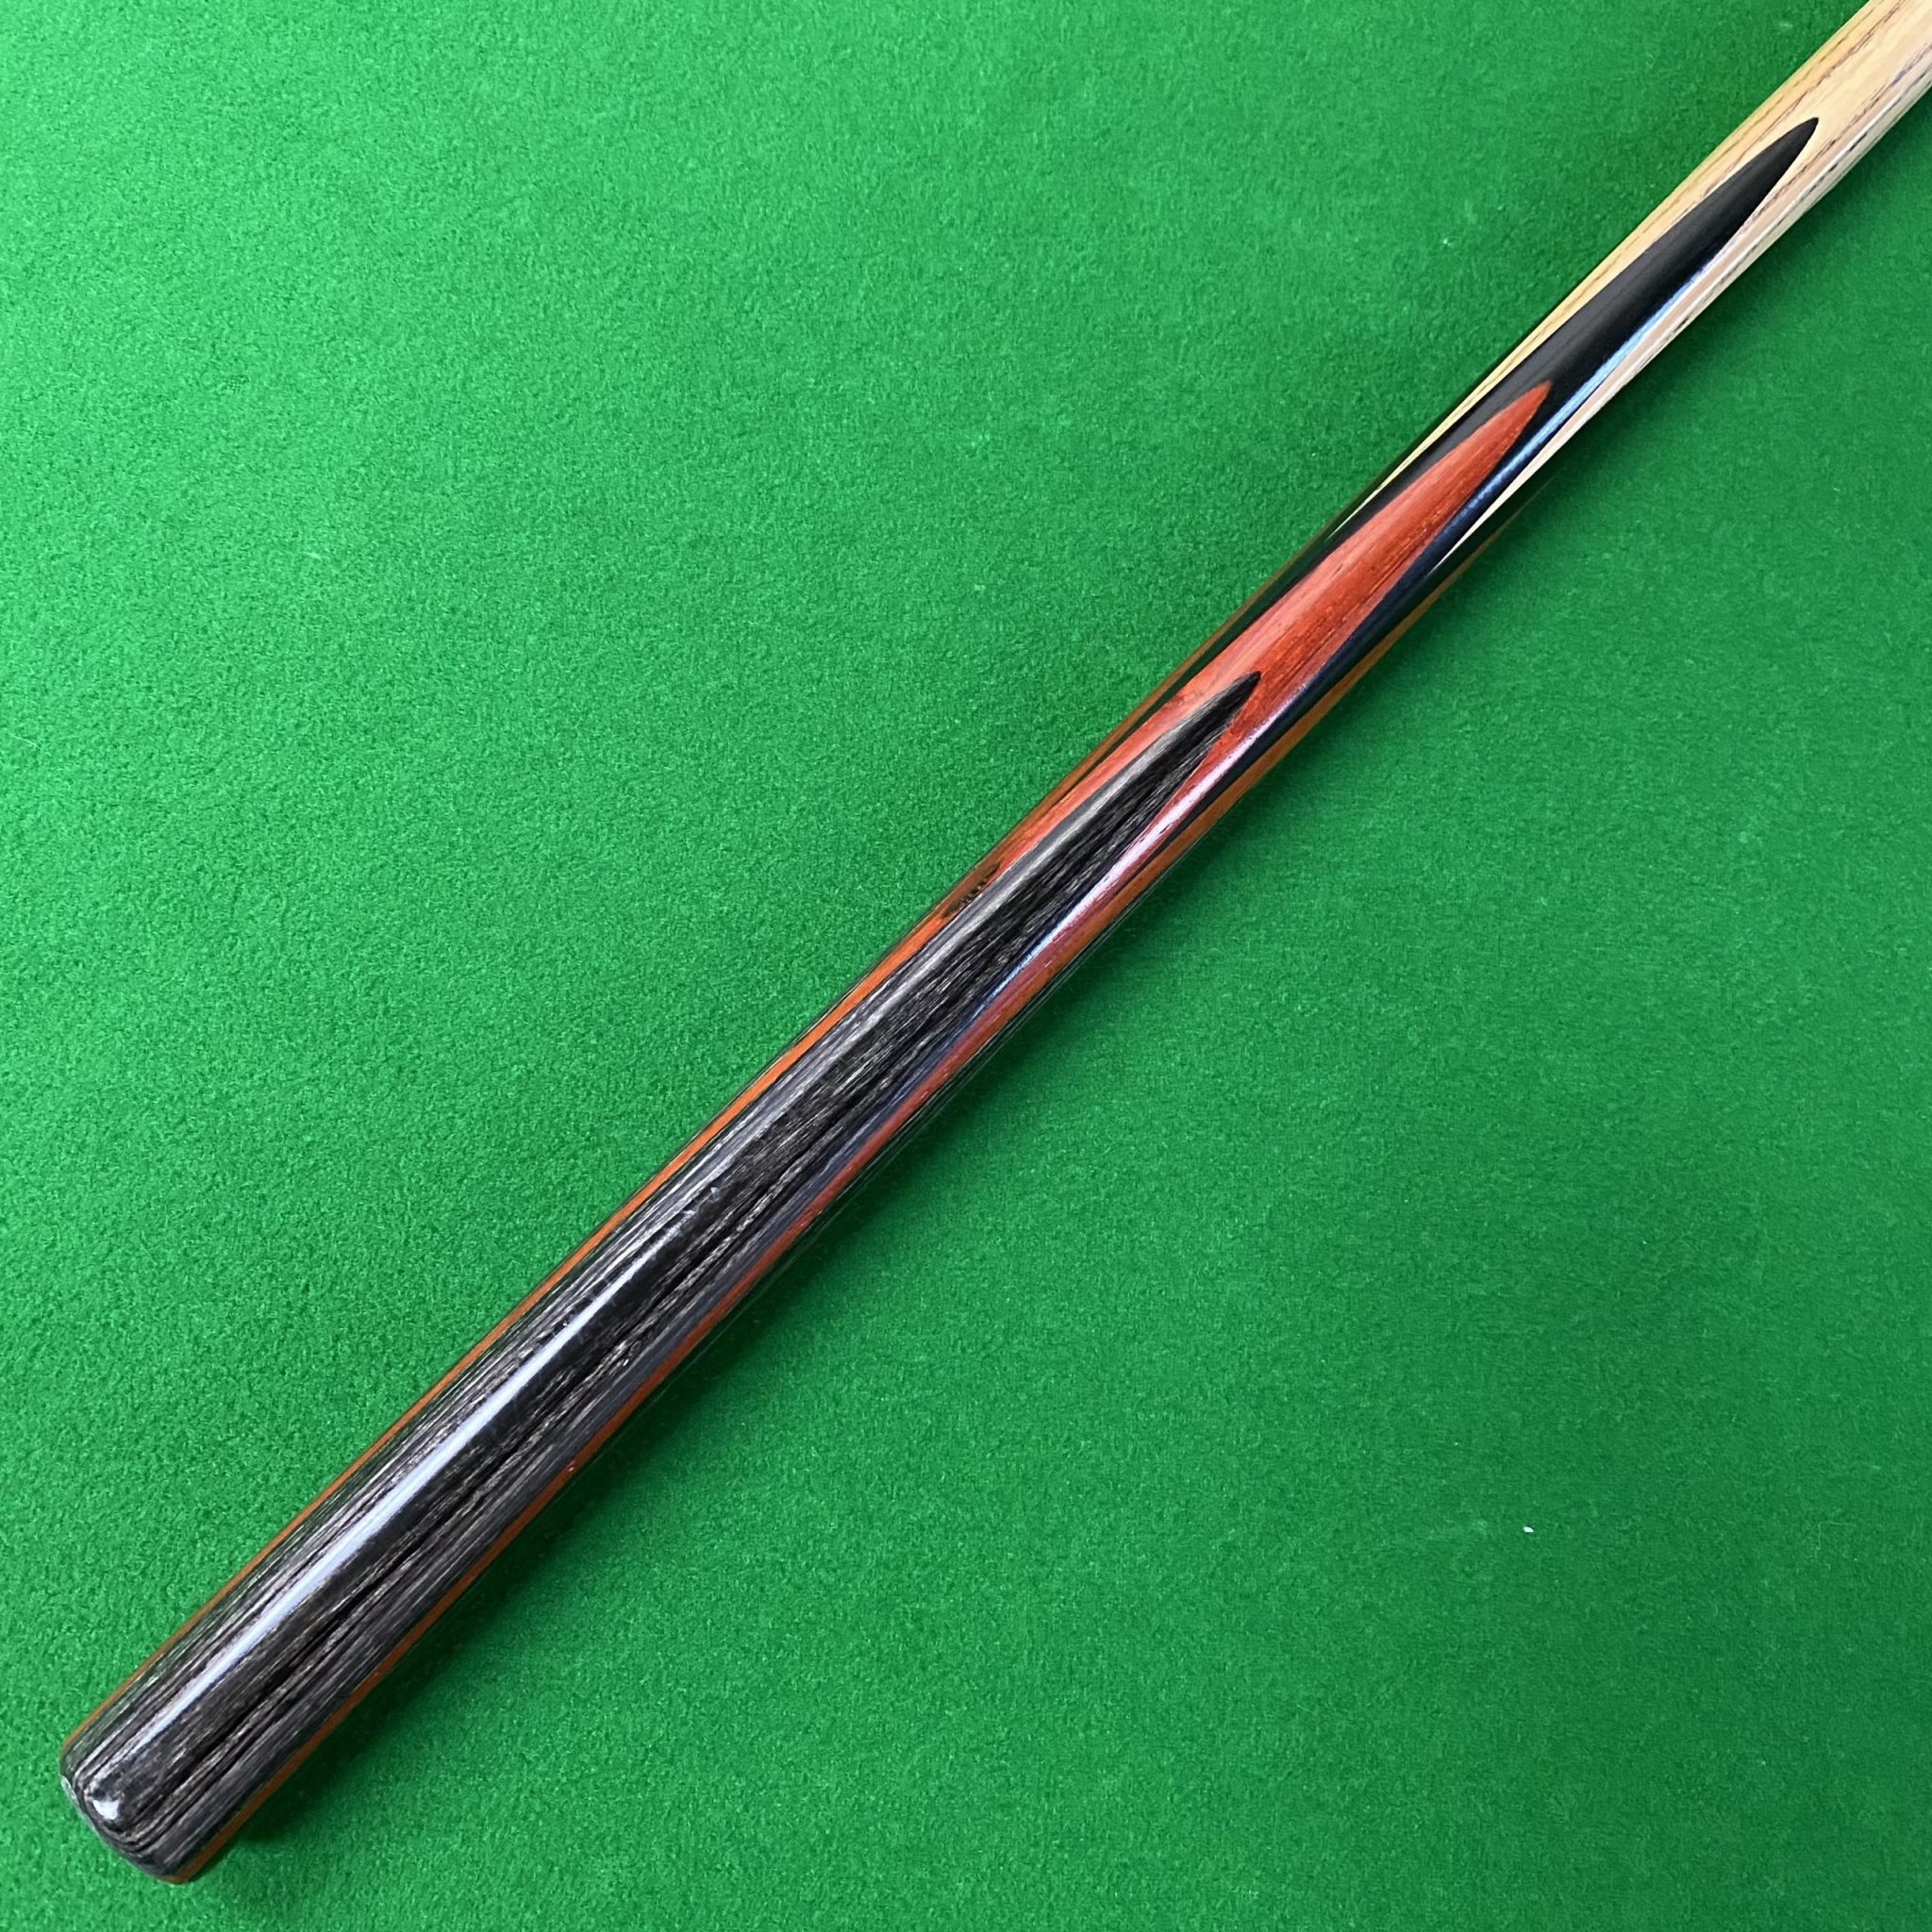 UK Stock Cuephoria 1pc Snooker Pool Cue & Case Set With Extensions 8.5mm Tip 